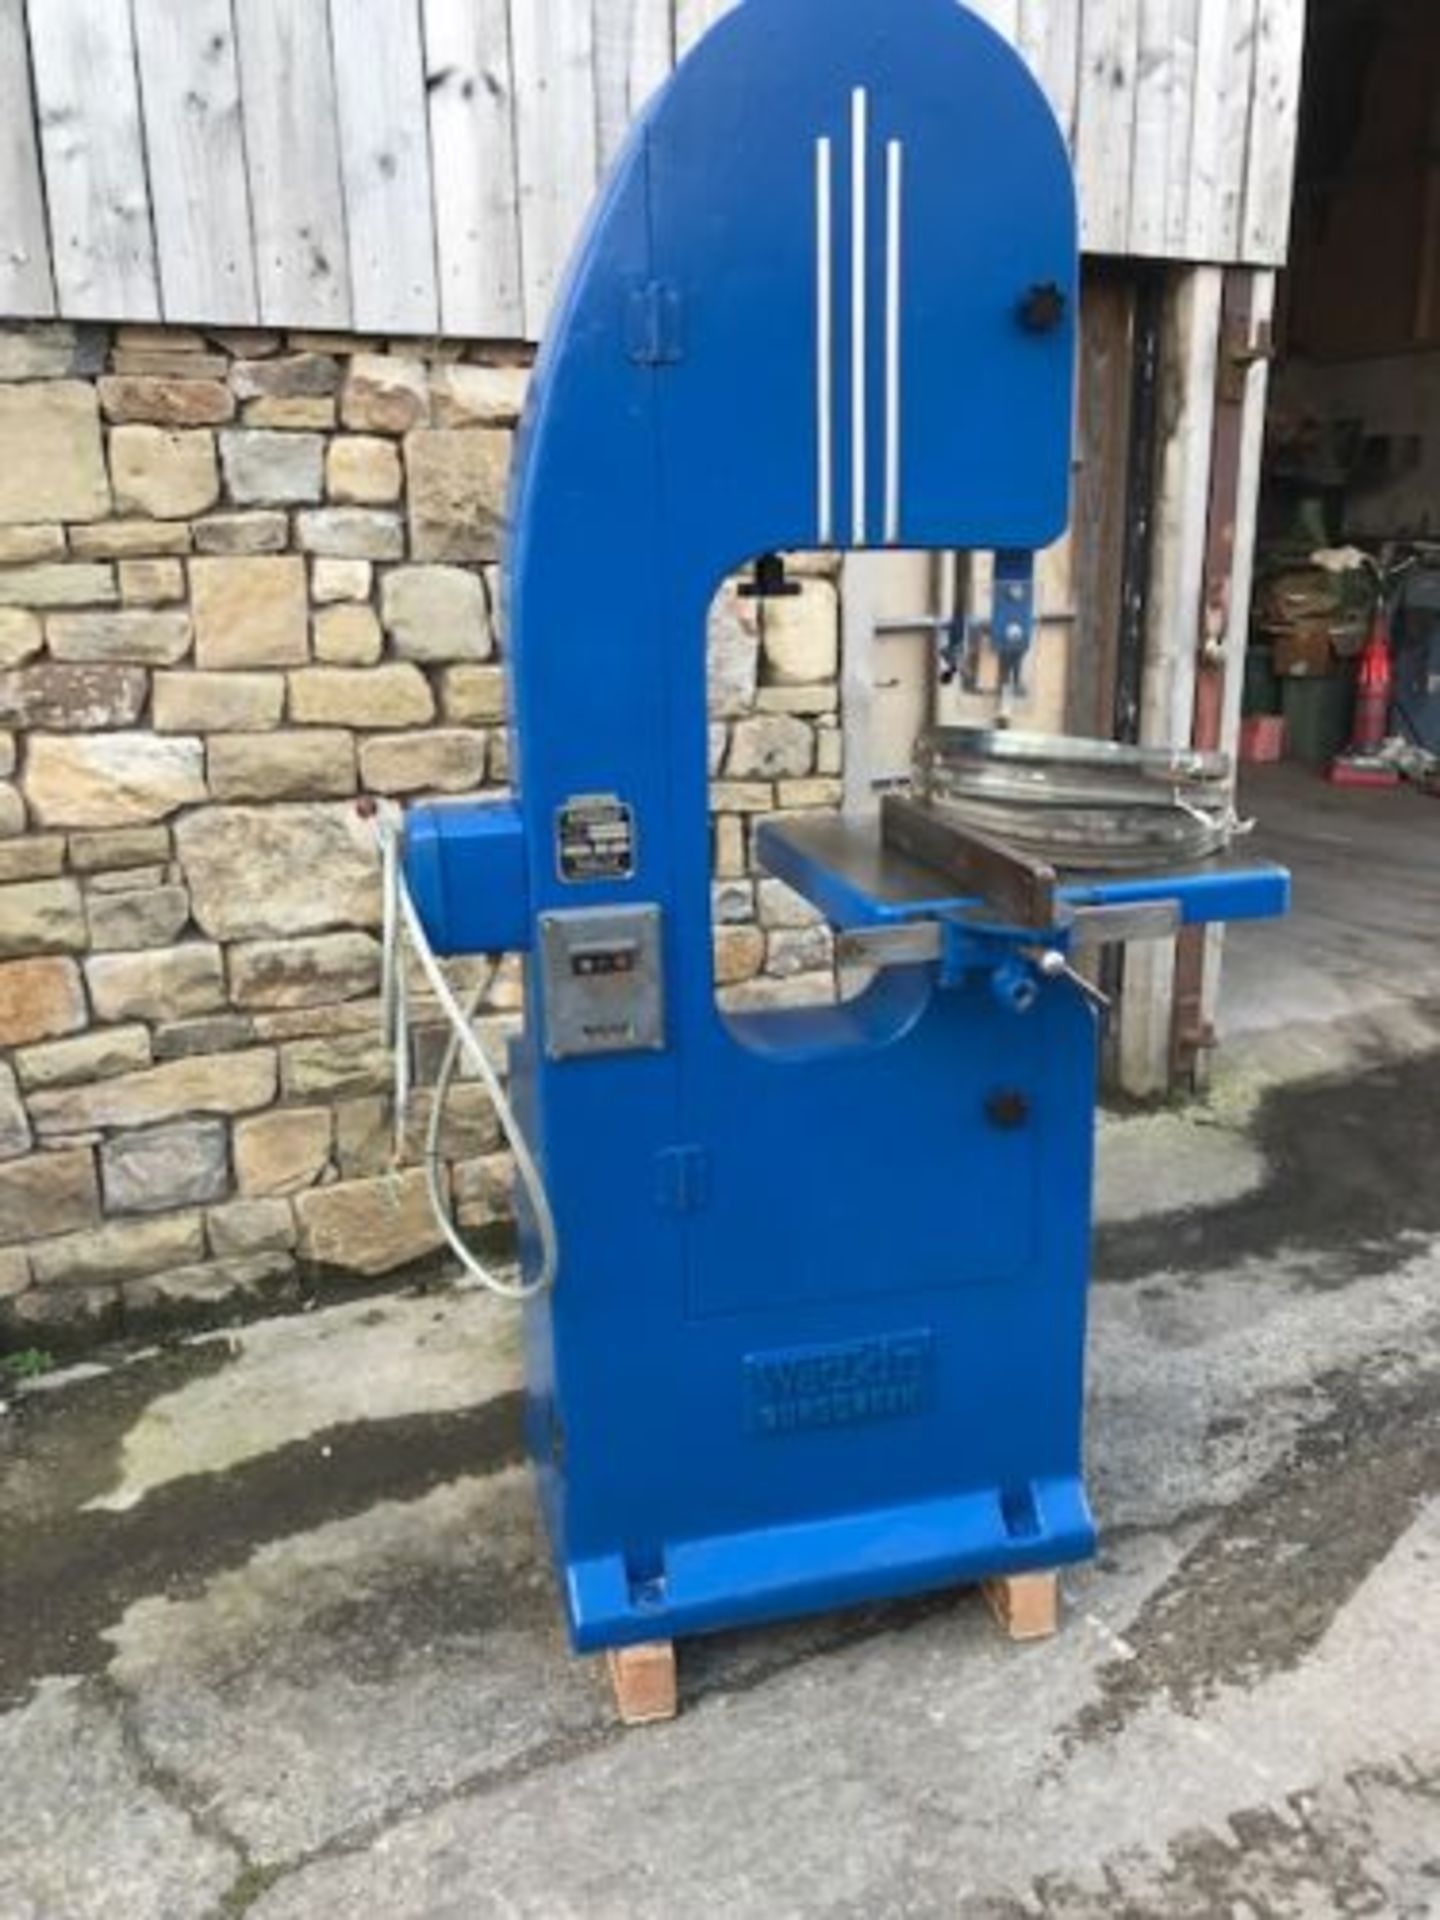 Wadkin MZF16in Bandsaw, with blades